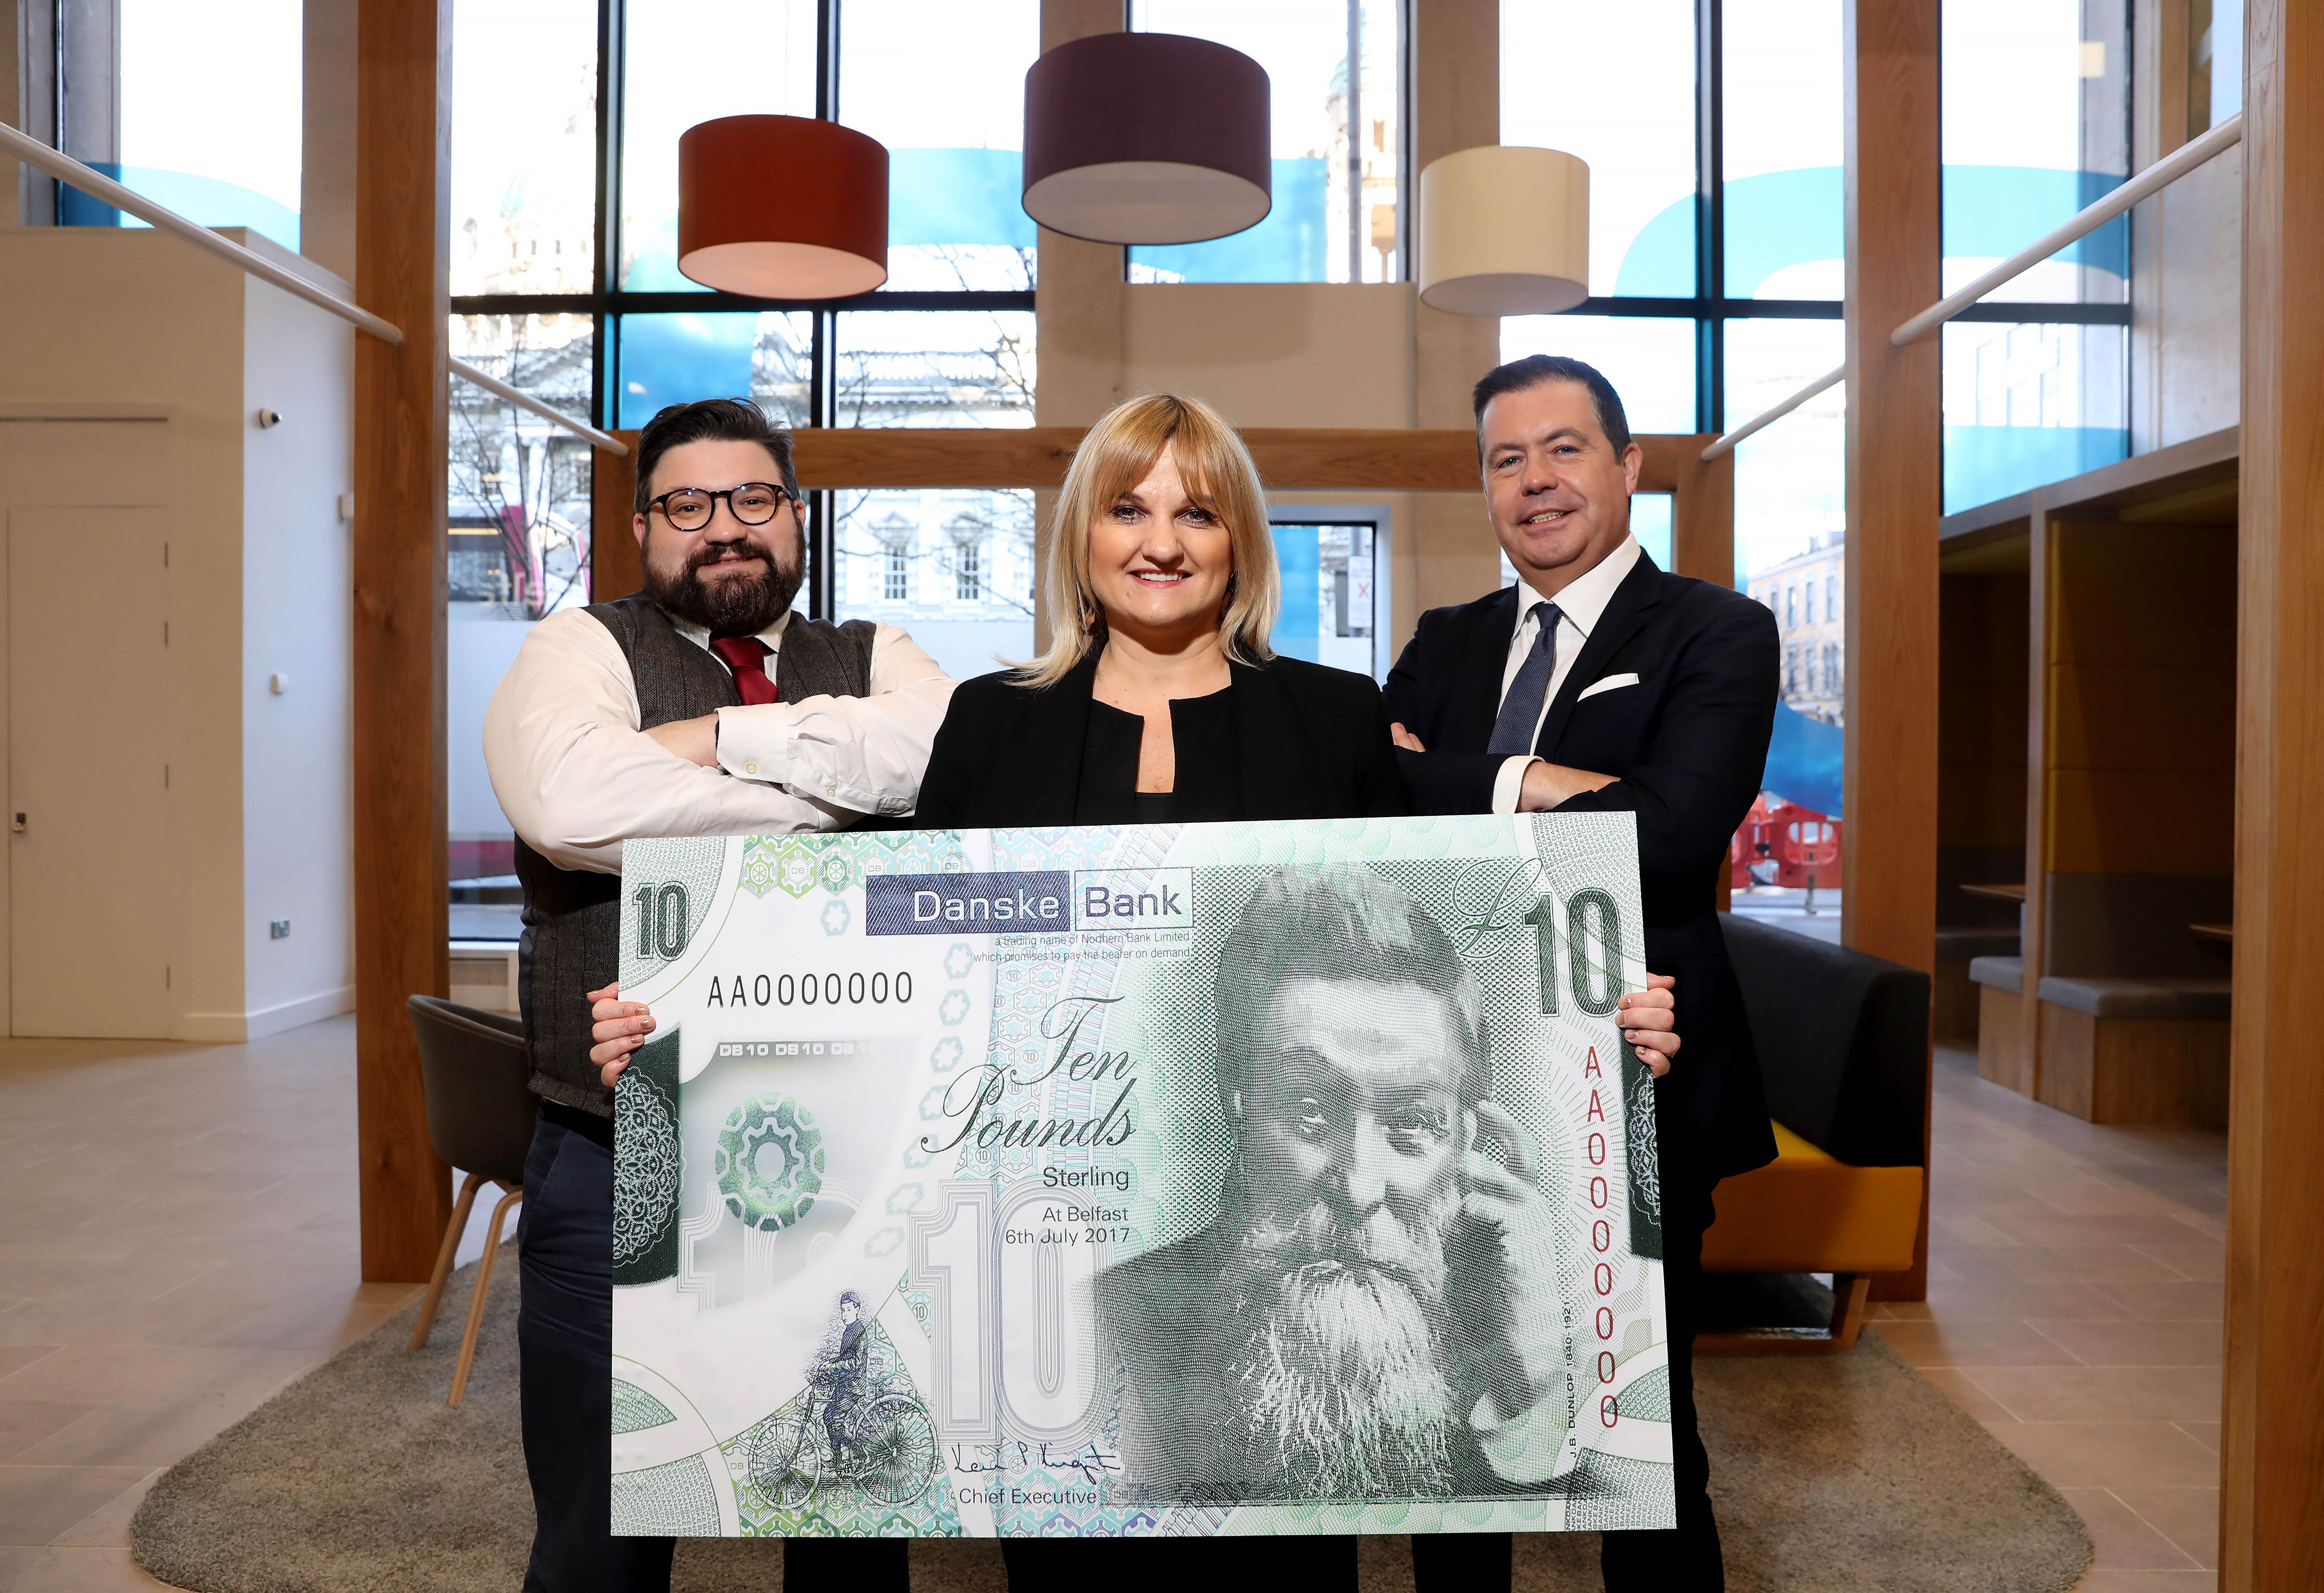 A woman stands between two men holding a large, green Danske Bank £10 note. The two men have their arms folded. 